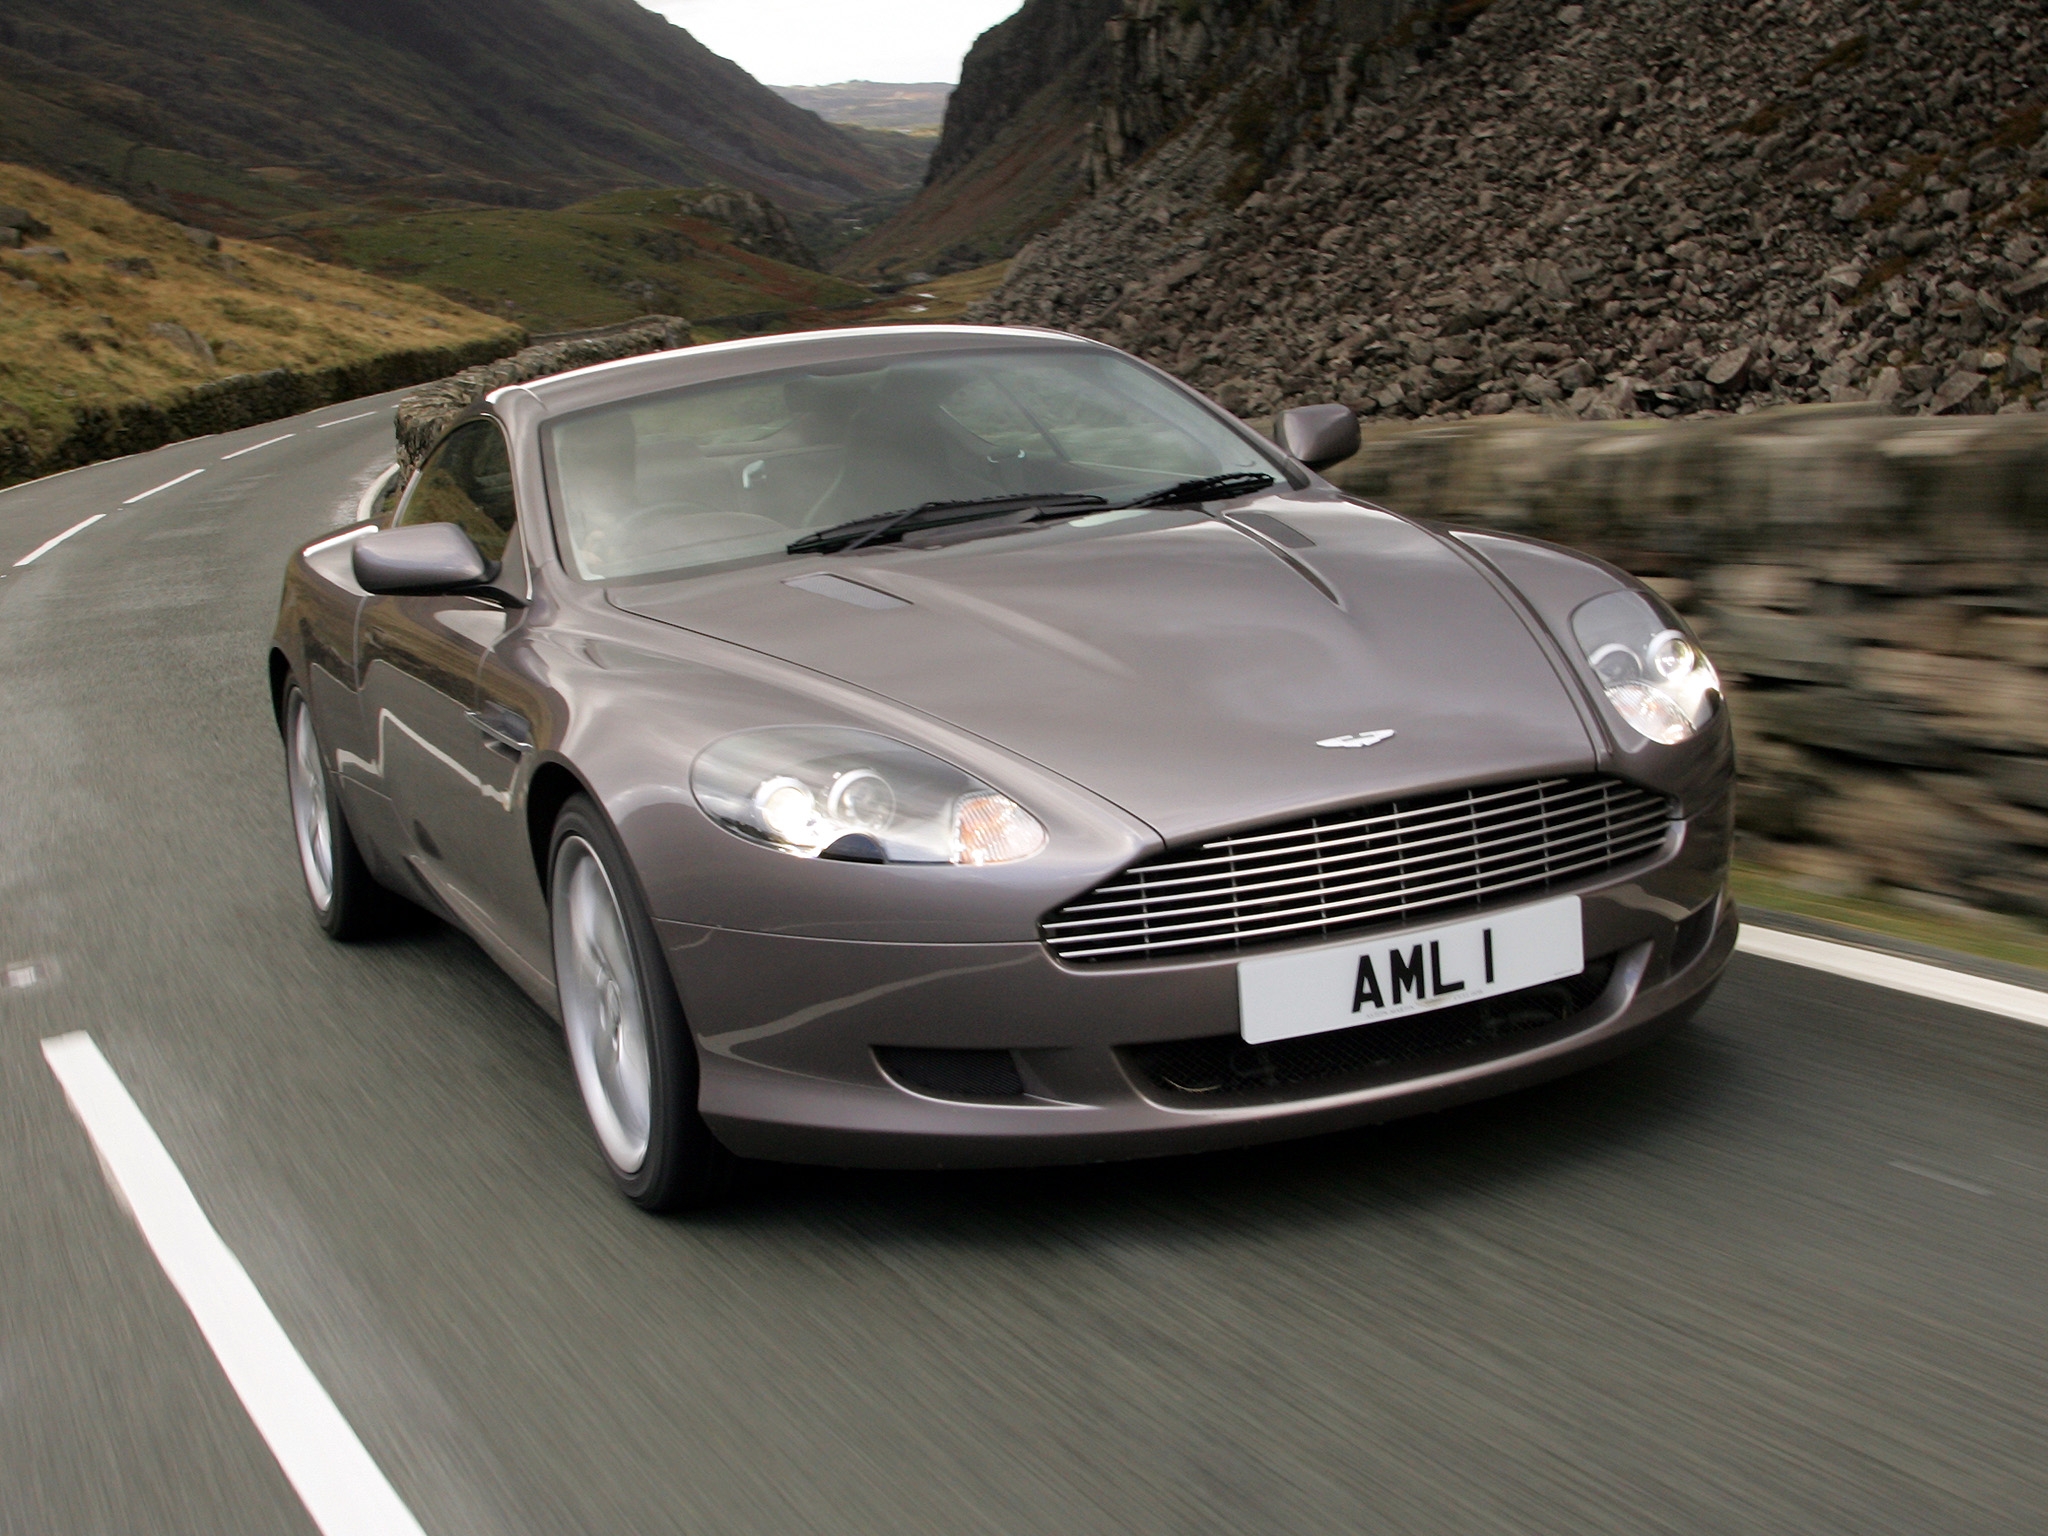 New Lock Screen Wallpapers auto, mountains, aston martin, cars, asphalt, front view, grey, speed, style, 2004, db9